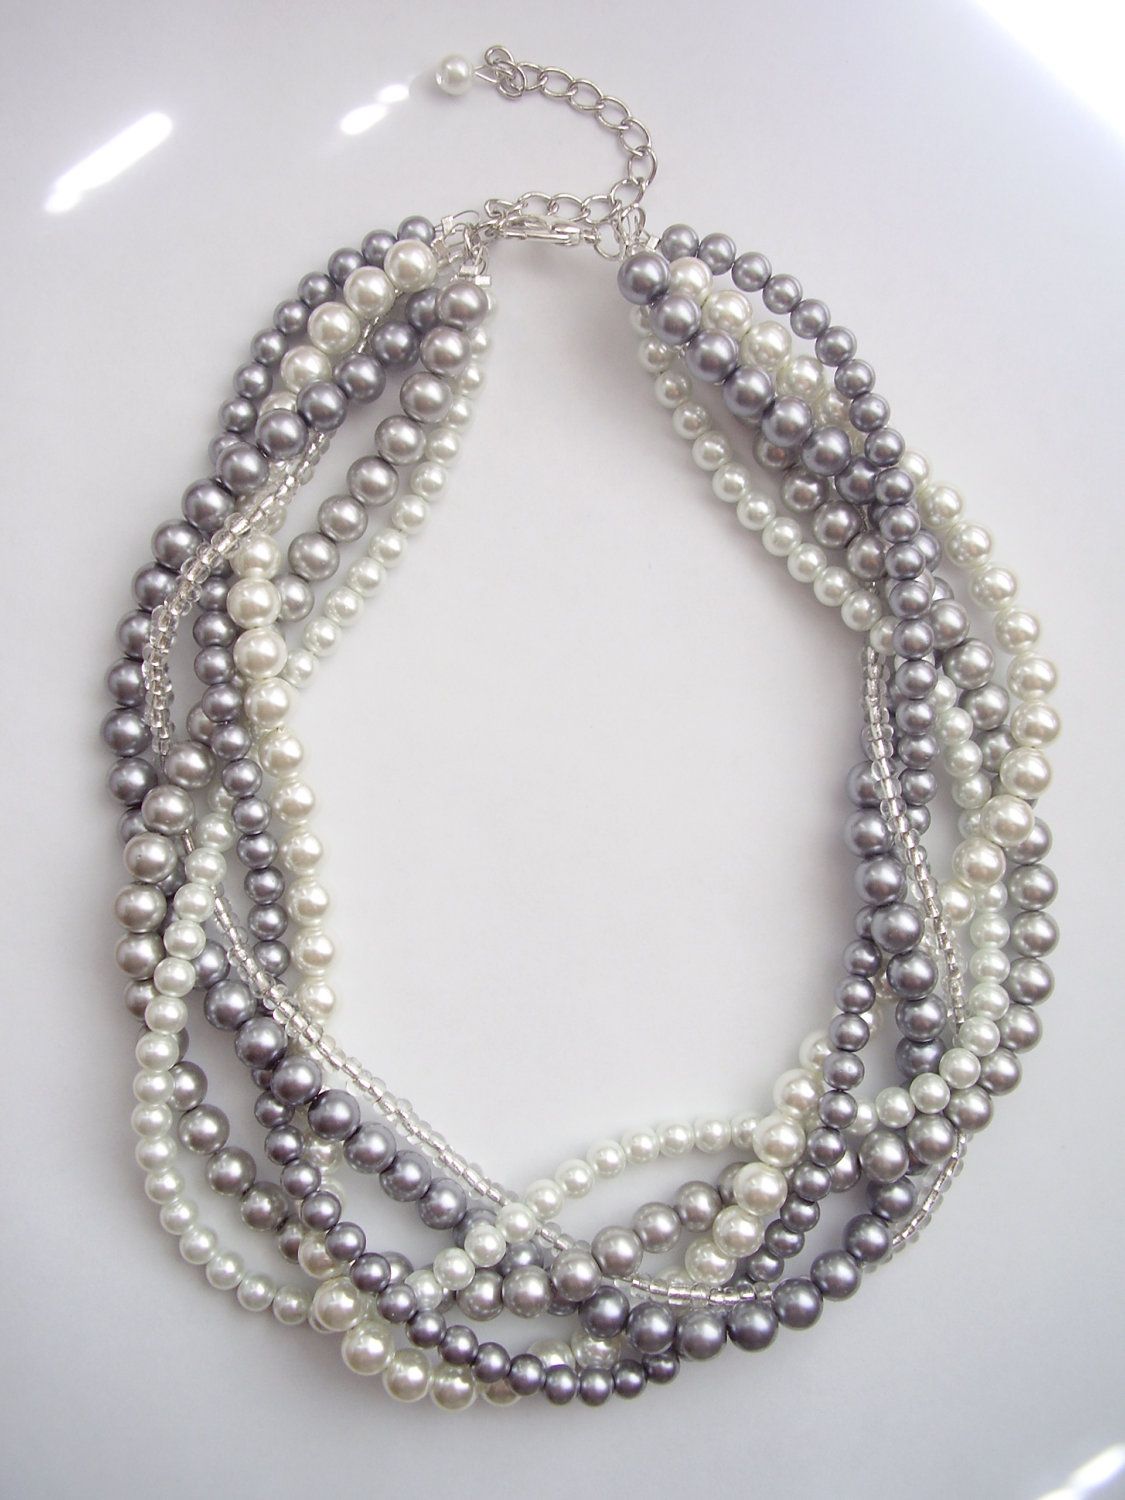 Custom order necklaces braided twisted chunky statement pearl necklace. $32.50,